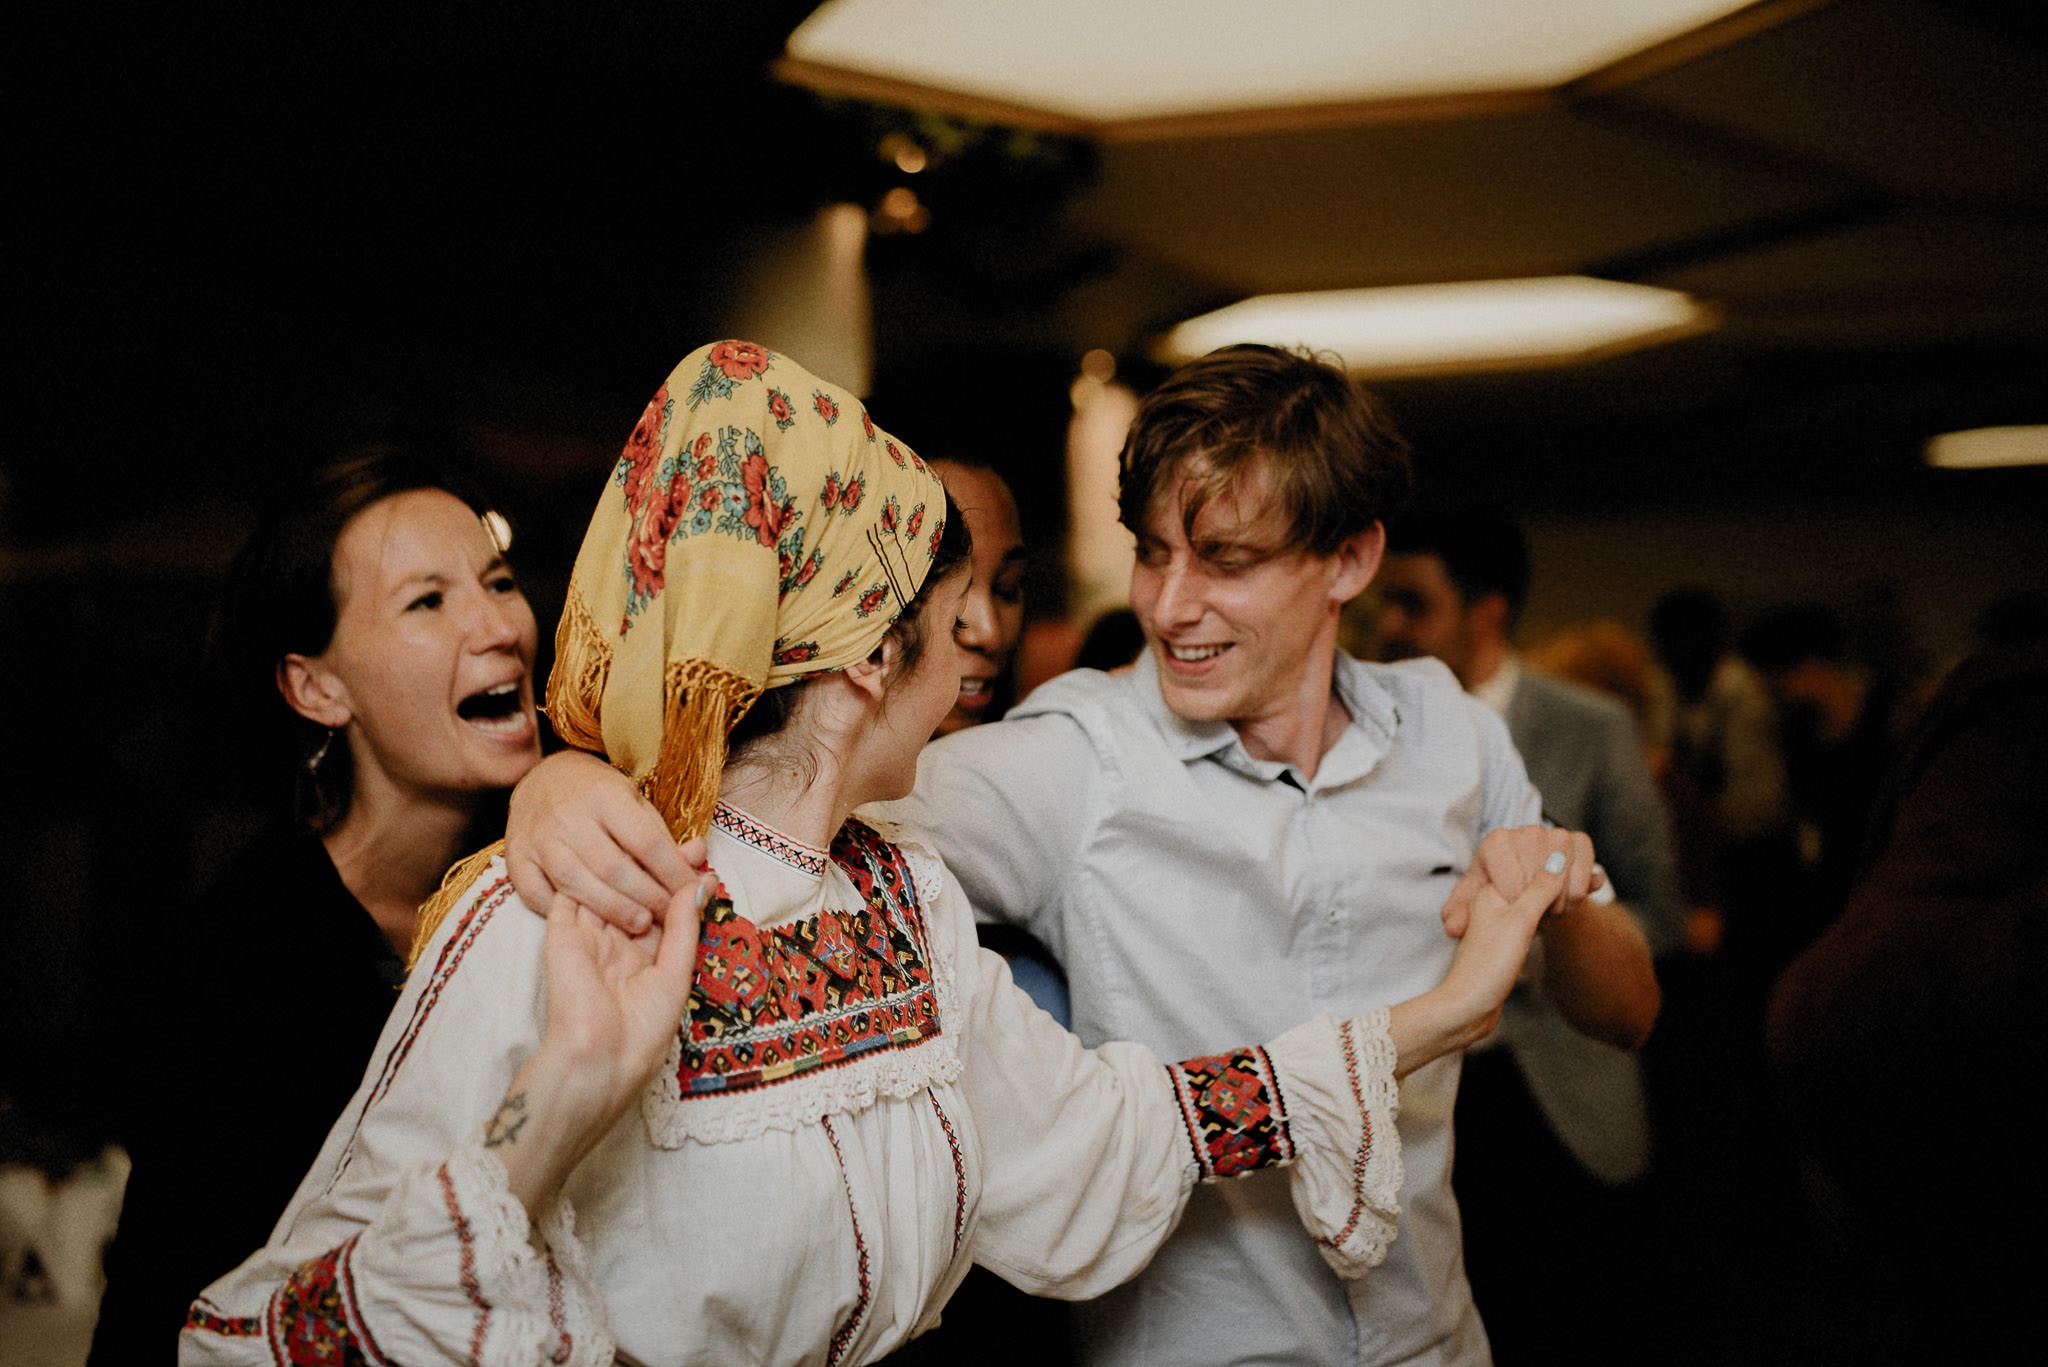 cultural exchange during a wedding party dance